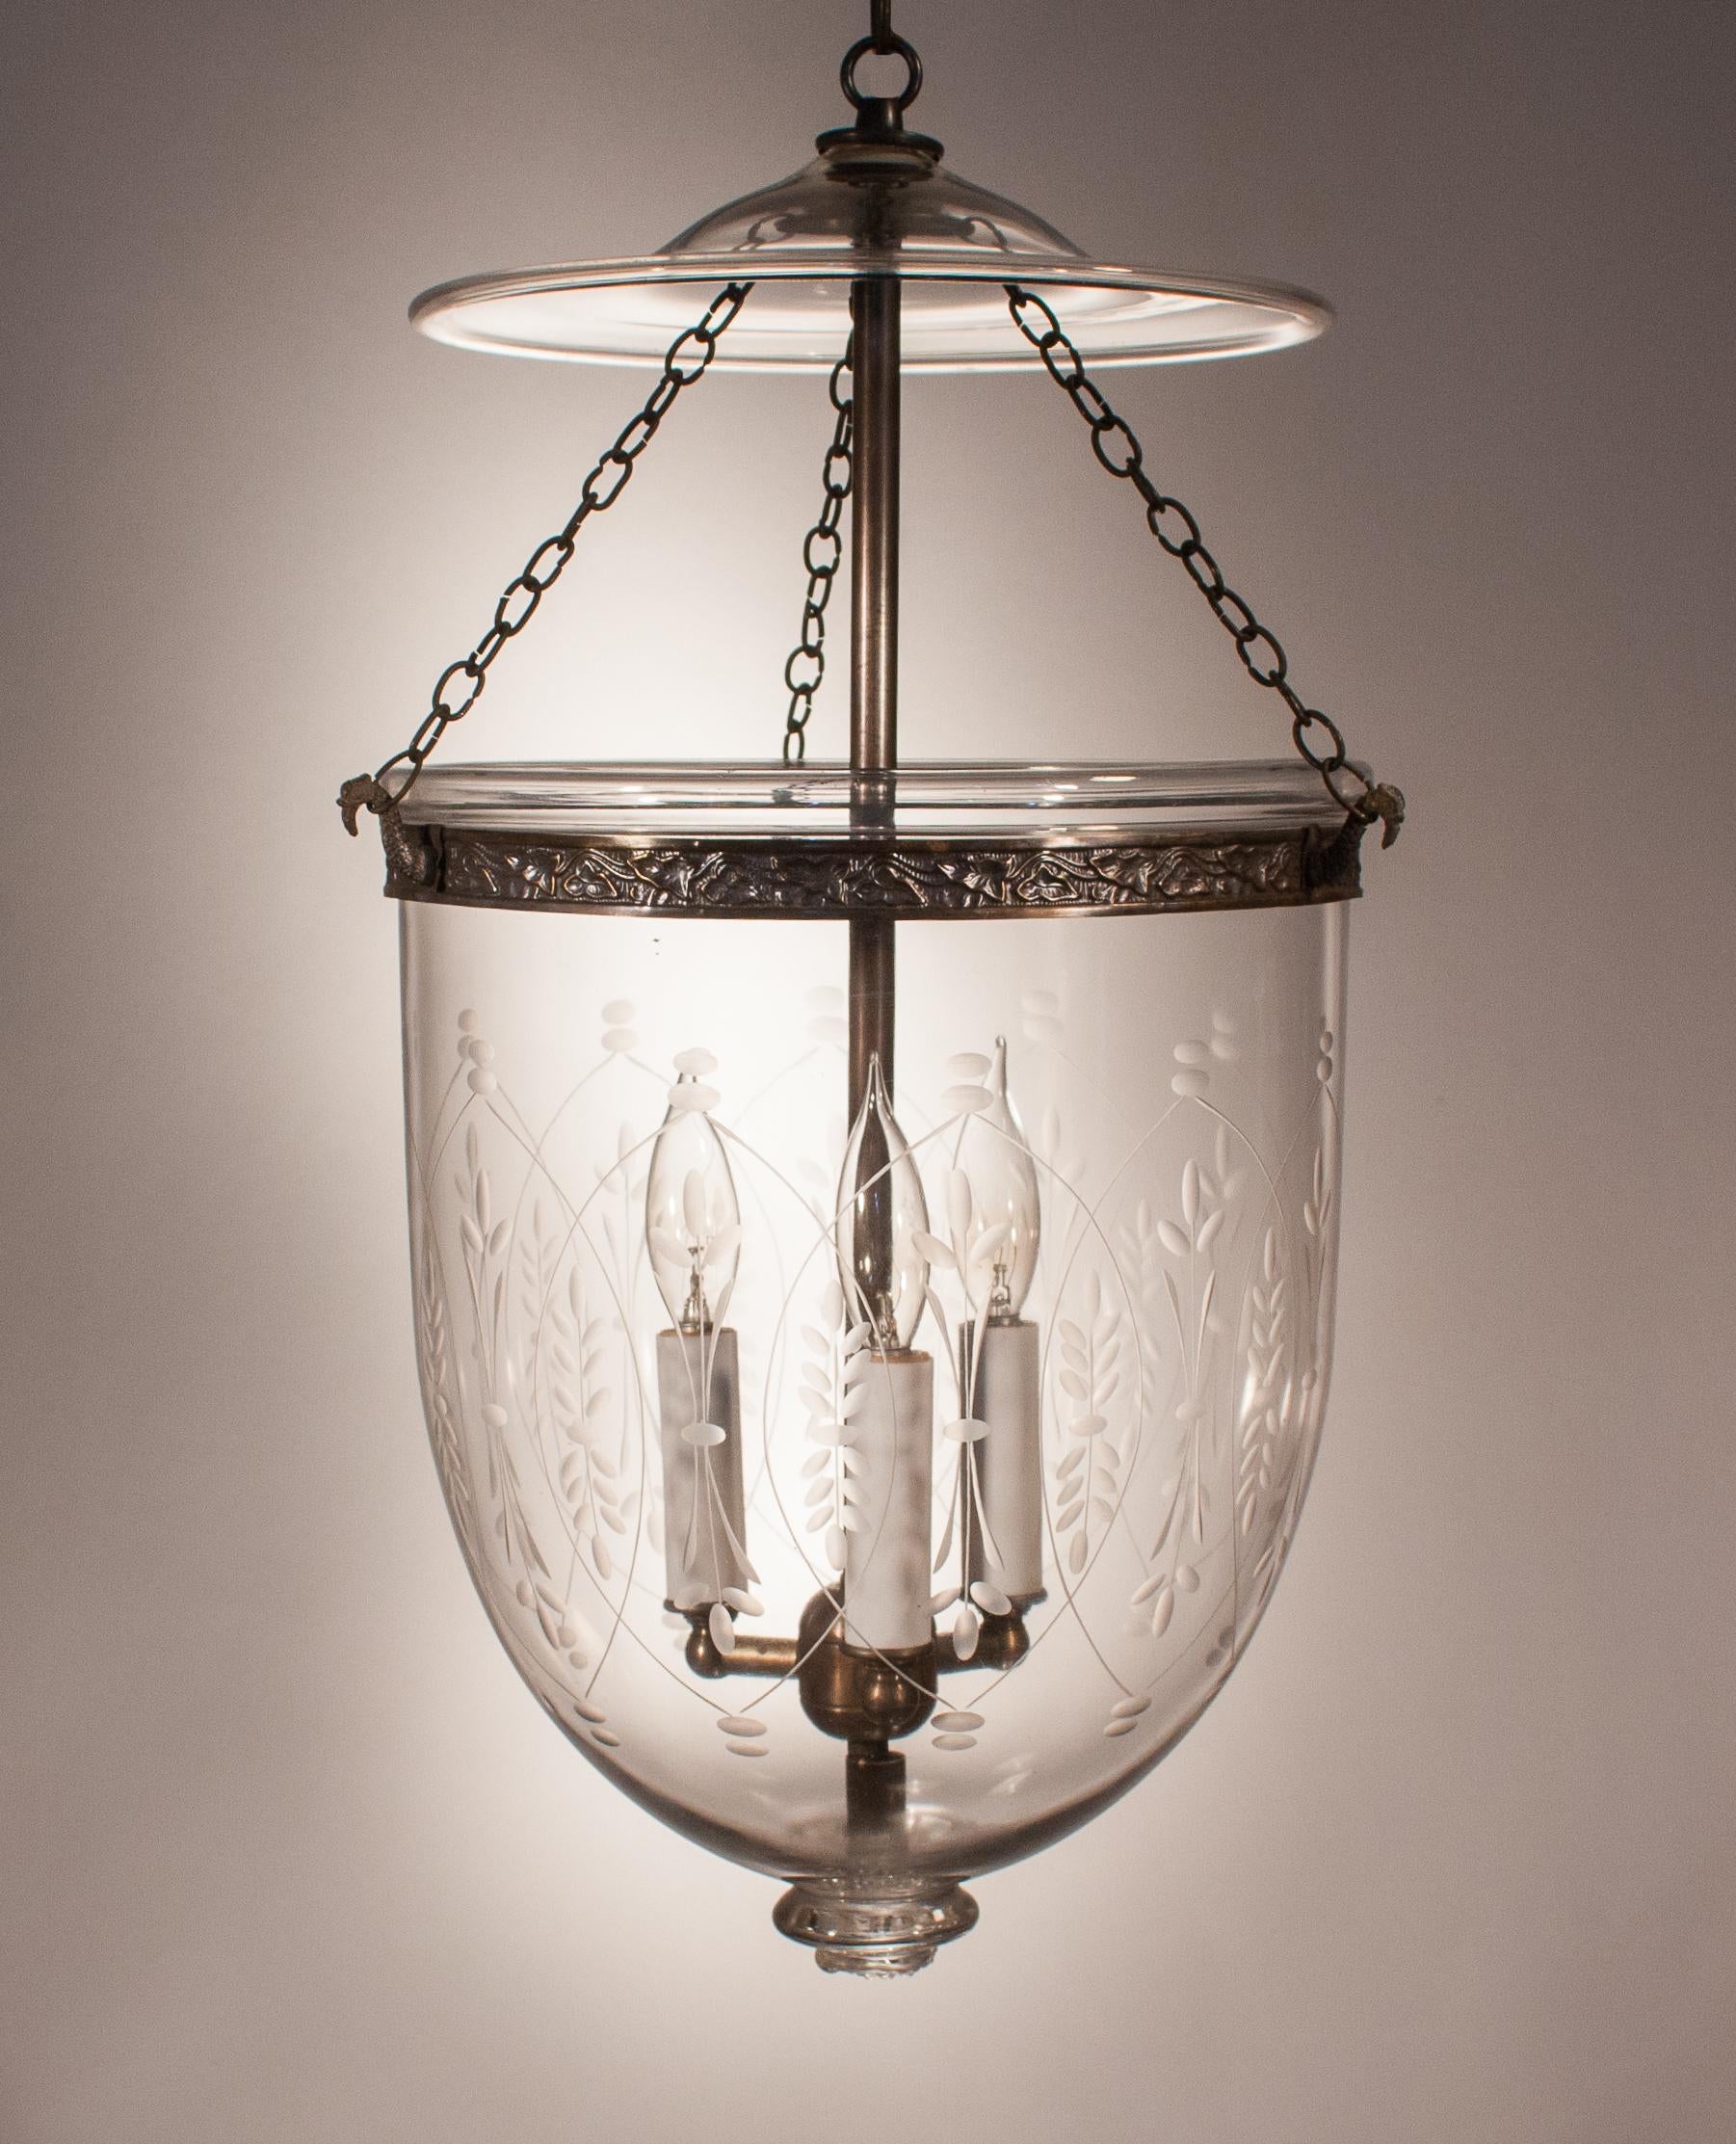 An antique bell jar lantern with superb quality hand blown glass. This authentic, circa 1890 hall lantern has appealing form that is accentuated by an etched wheat motif. The decorative brass band has been replaced to ensure the integrity of the